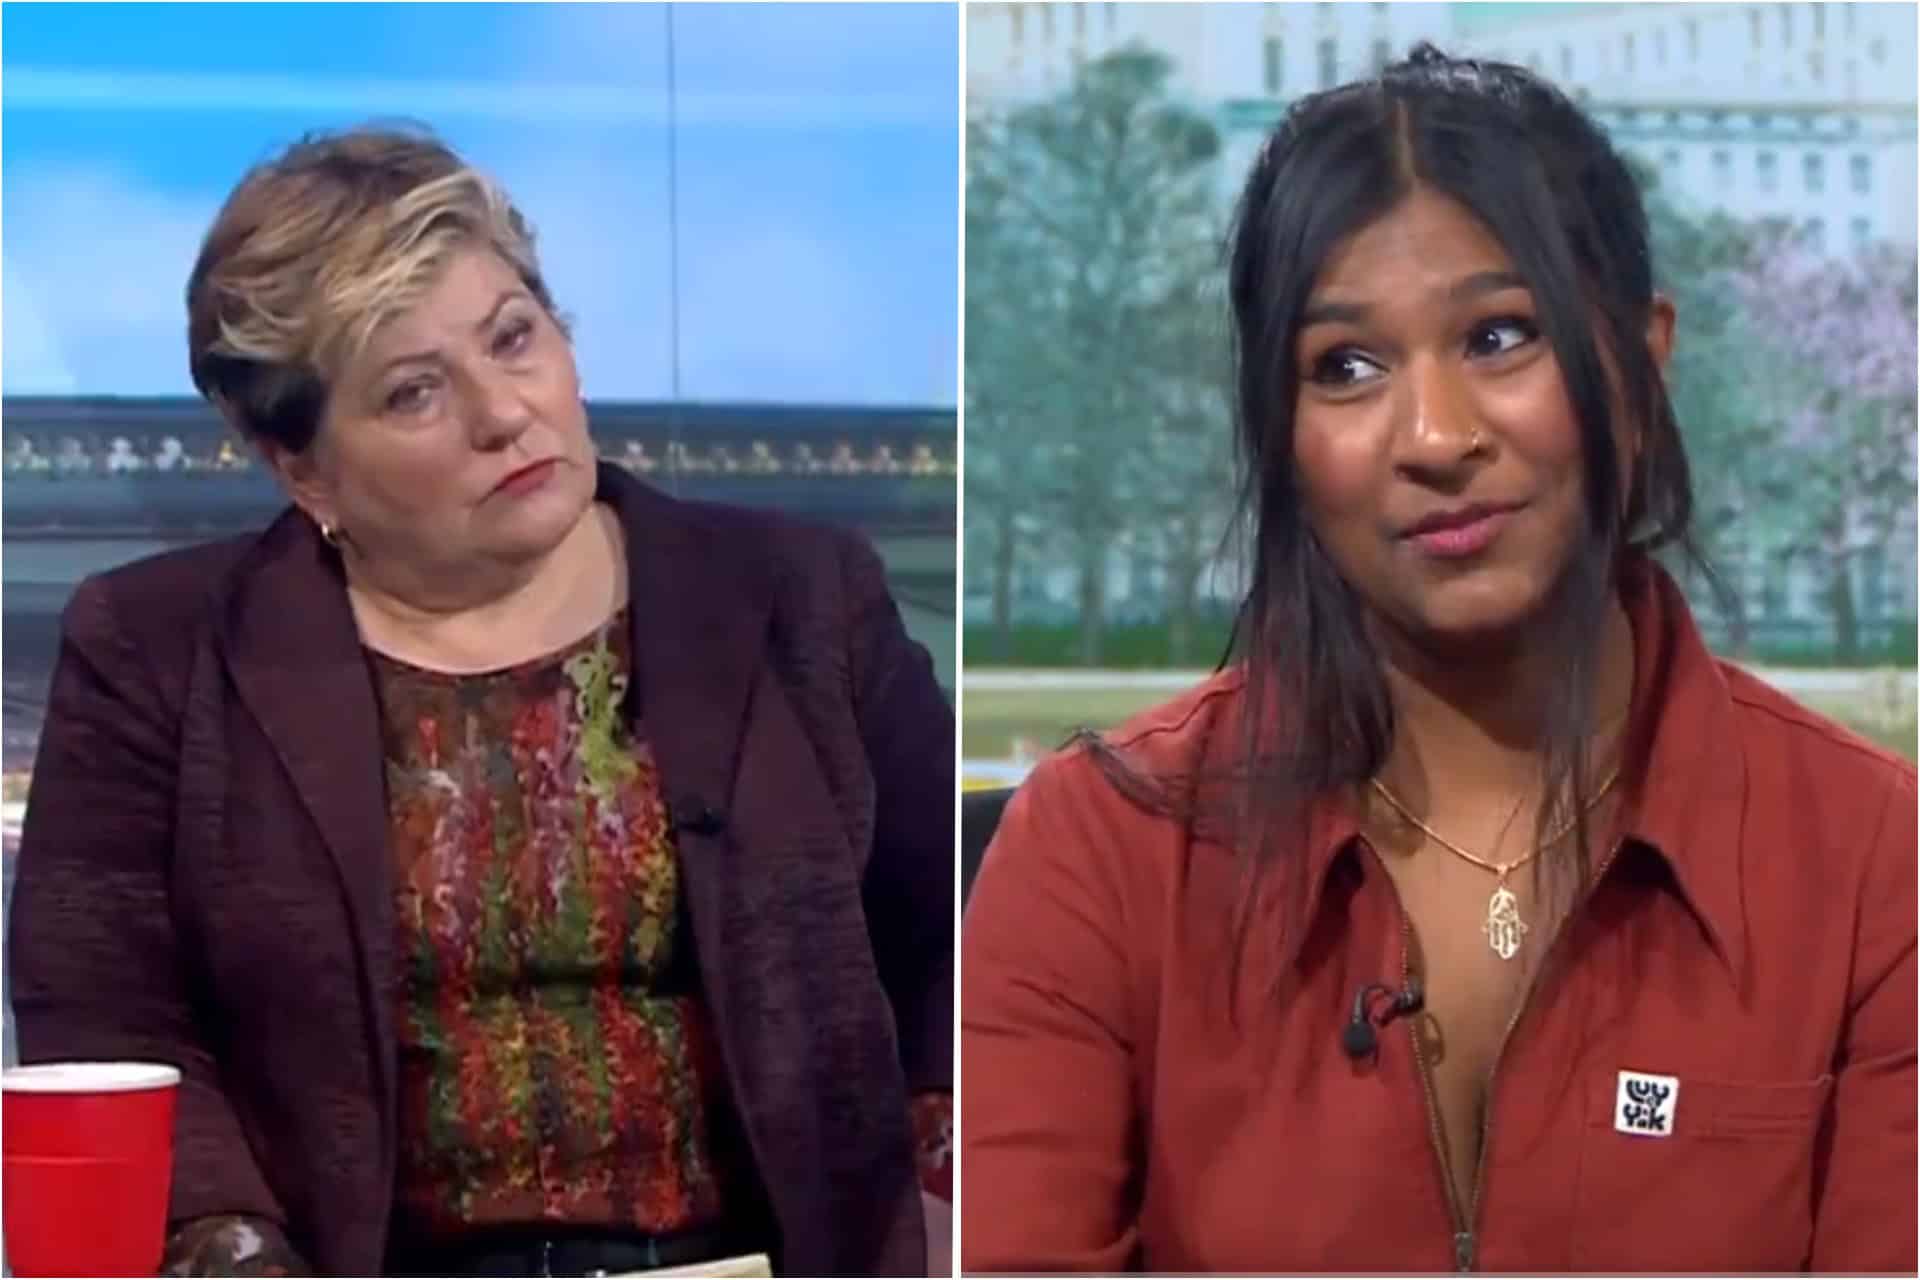 Ash Sarkar rips into Emily Thornberry over Labour’s stance on Gaza